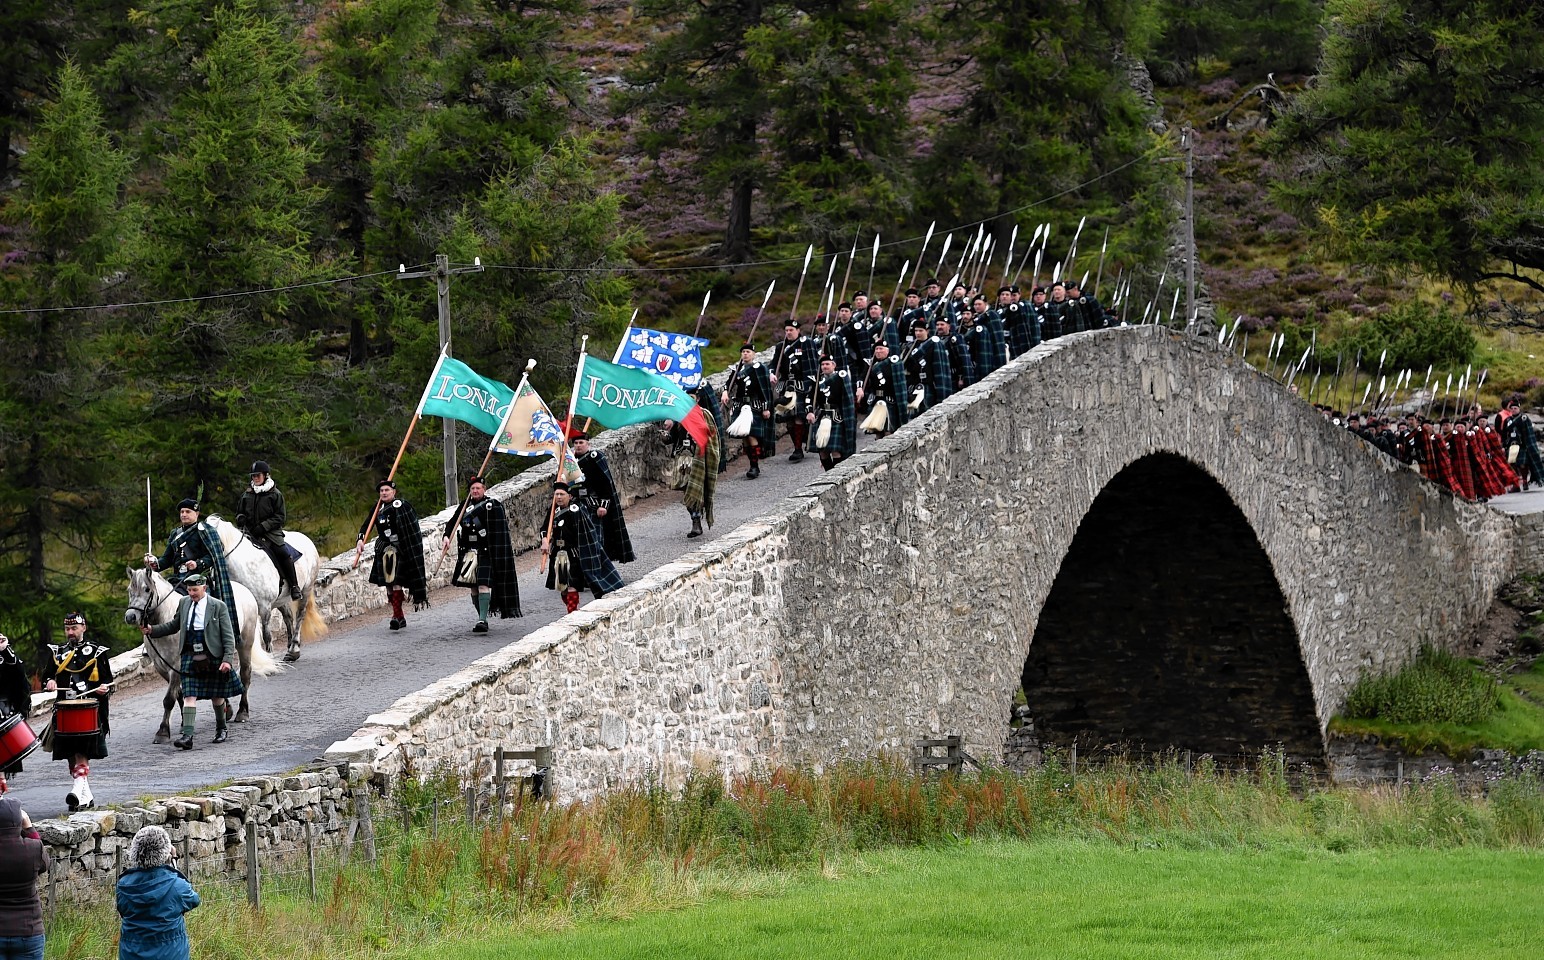 Gairnshiel Bridge on the A939. The bridge was never built for cars. Here, the Lonach Highlanders march over the crossing in 2015.